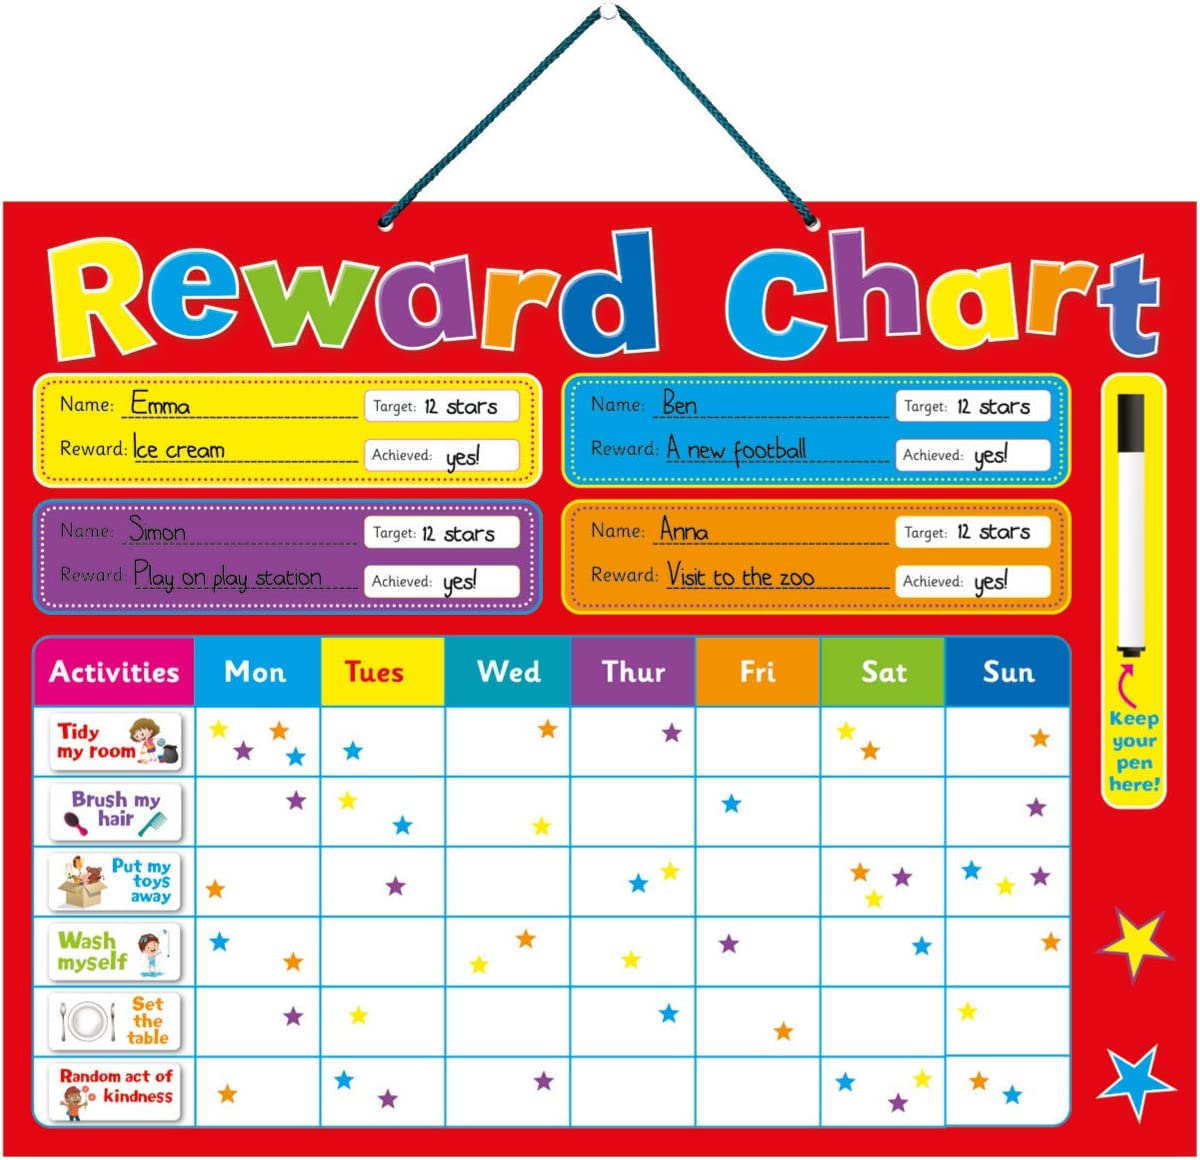 Reward Chart | Twinkle Star Baby & Party Store